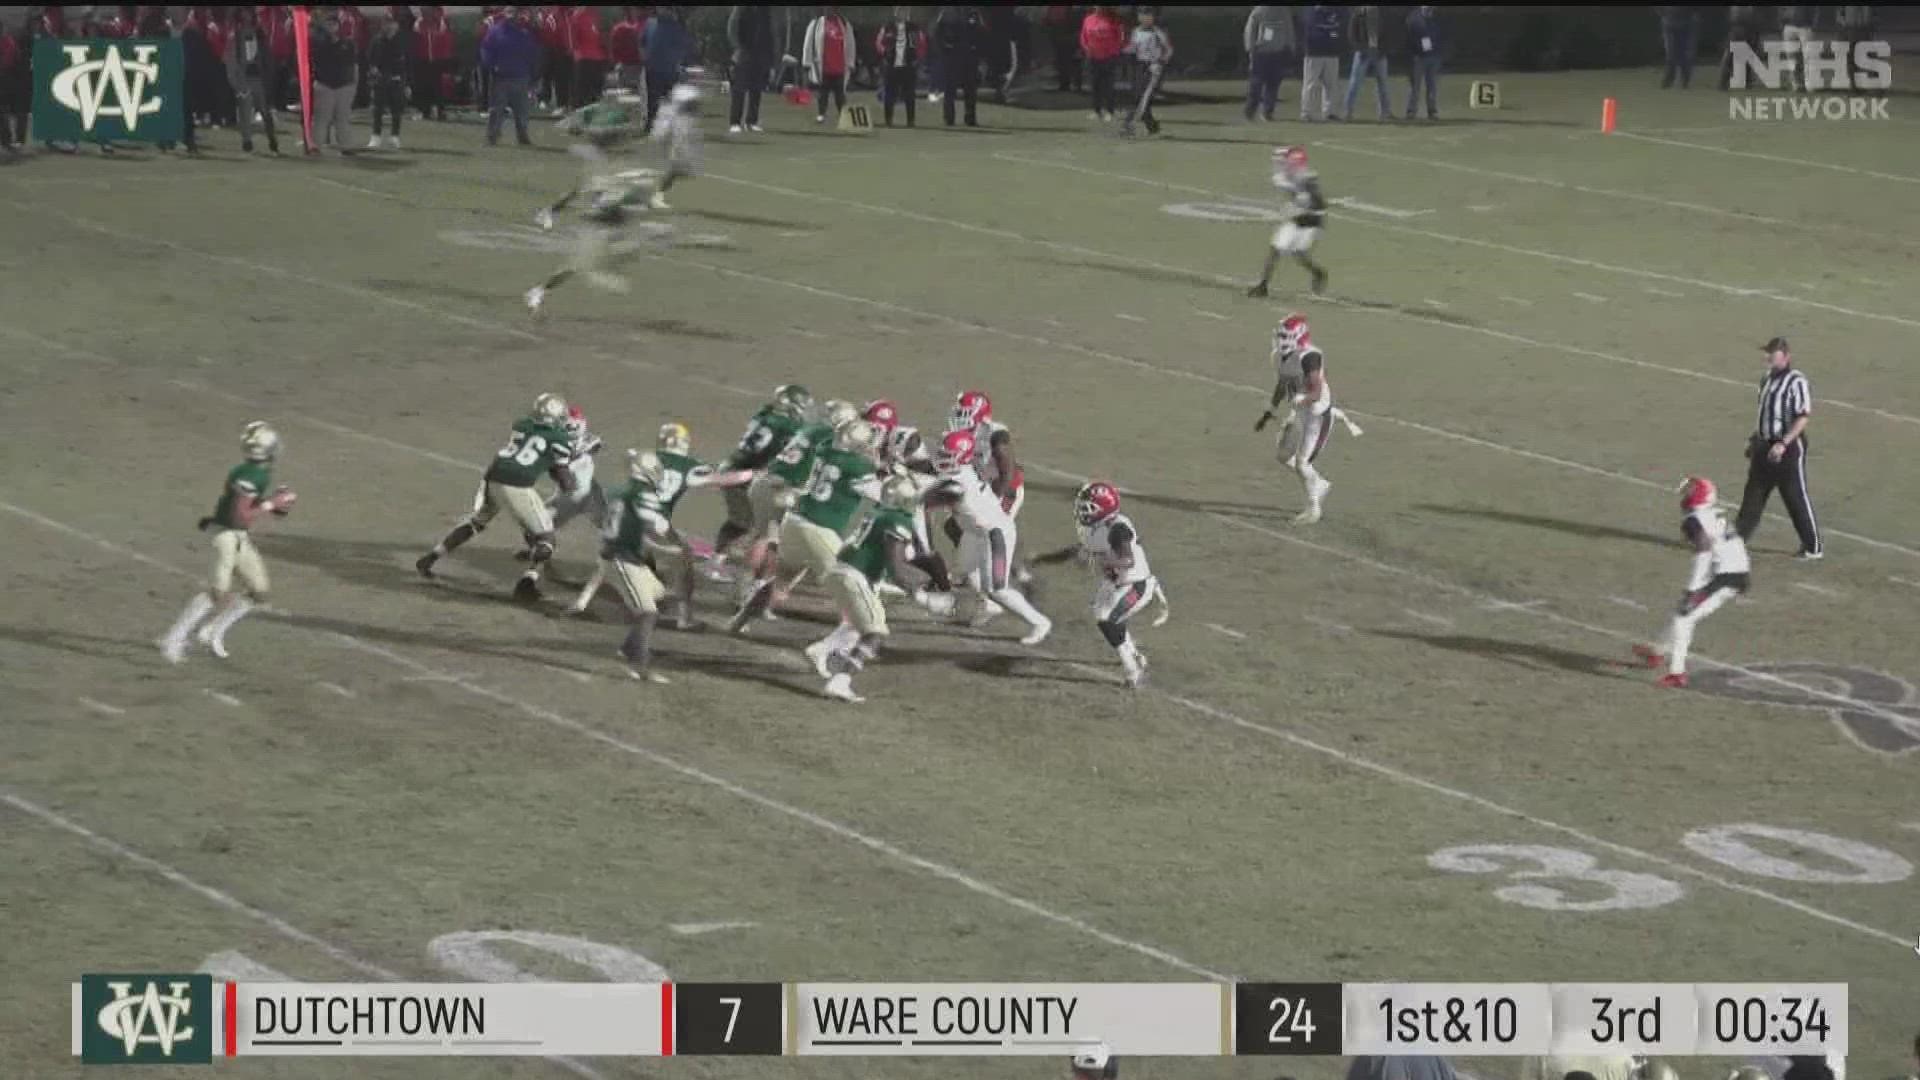 Ware County wins easily by a final of 31-7 and will take on Warner Robins in the 5A title game next week.